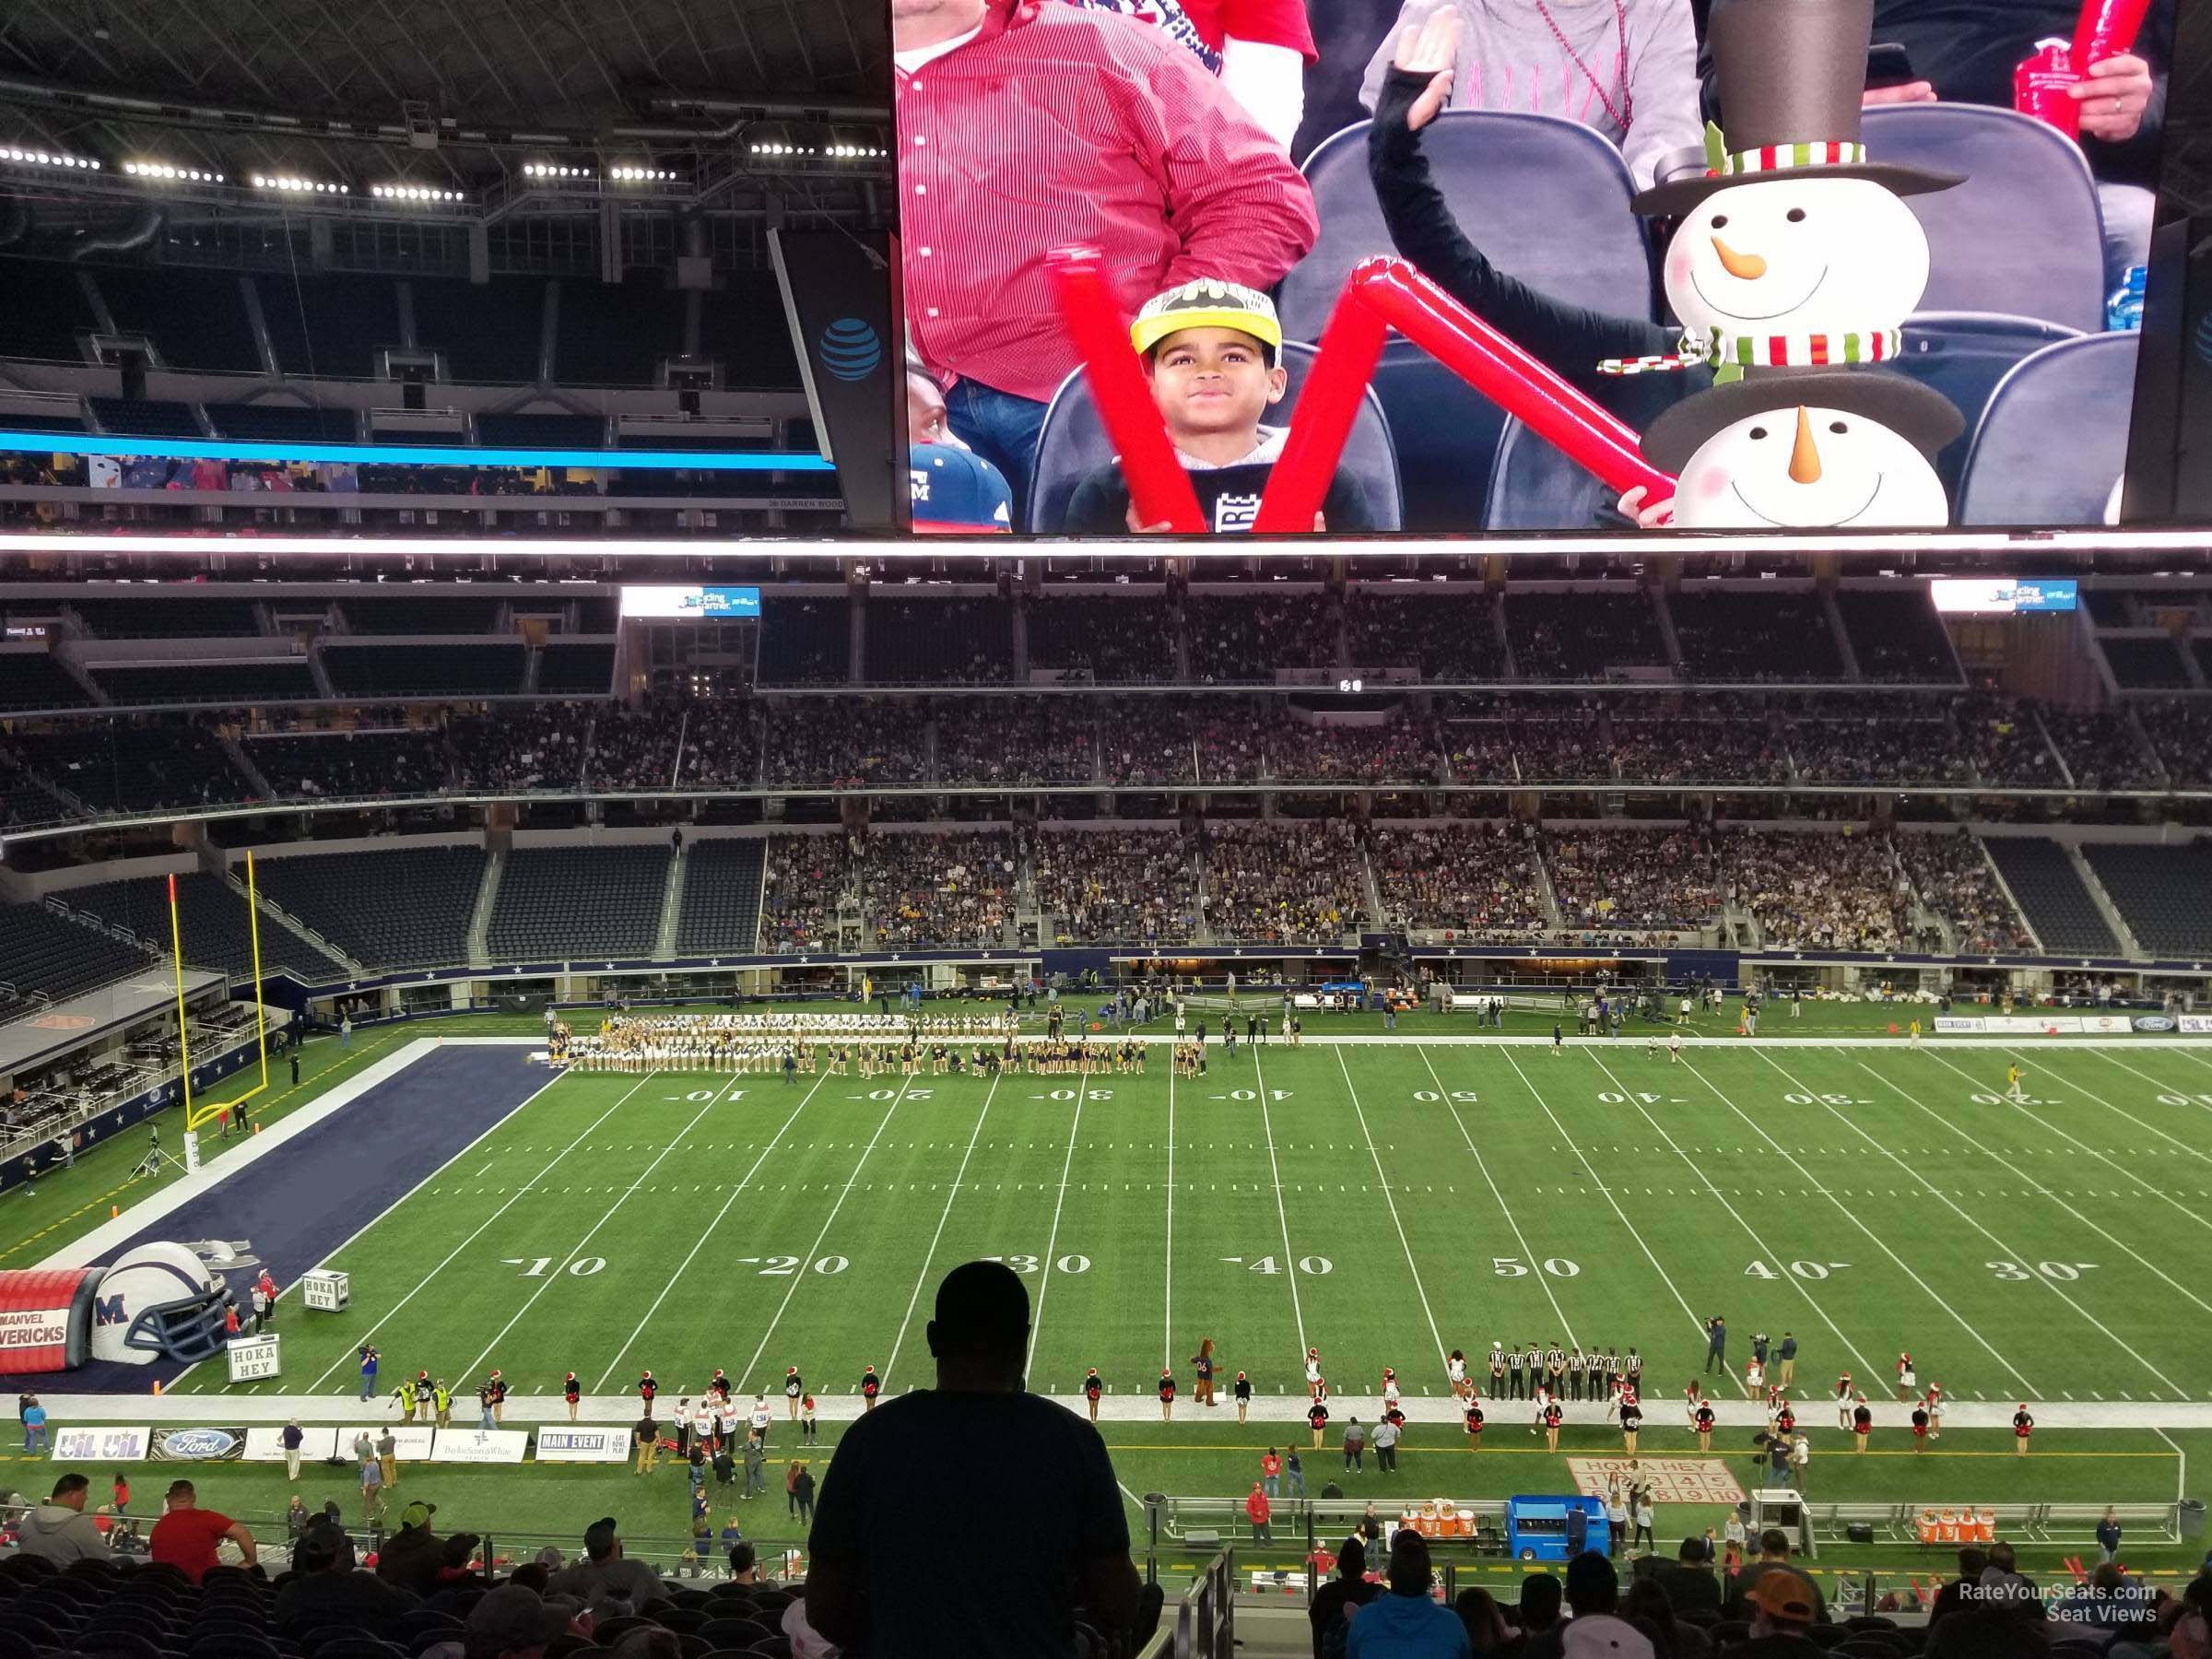 section c311, row 10 seat view  for football - at&t stadium (cowboys stadium)